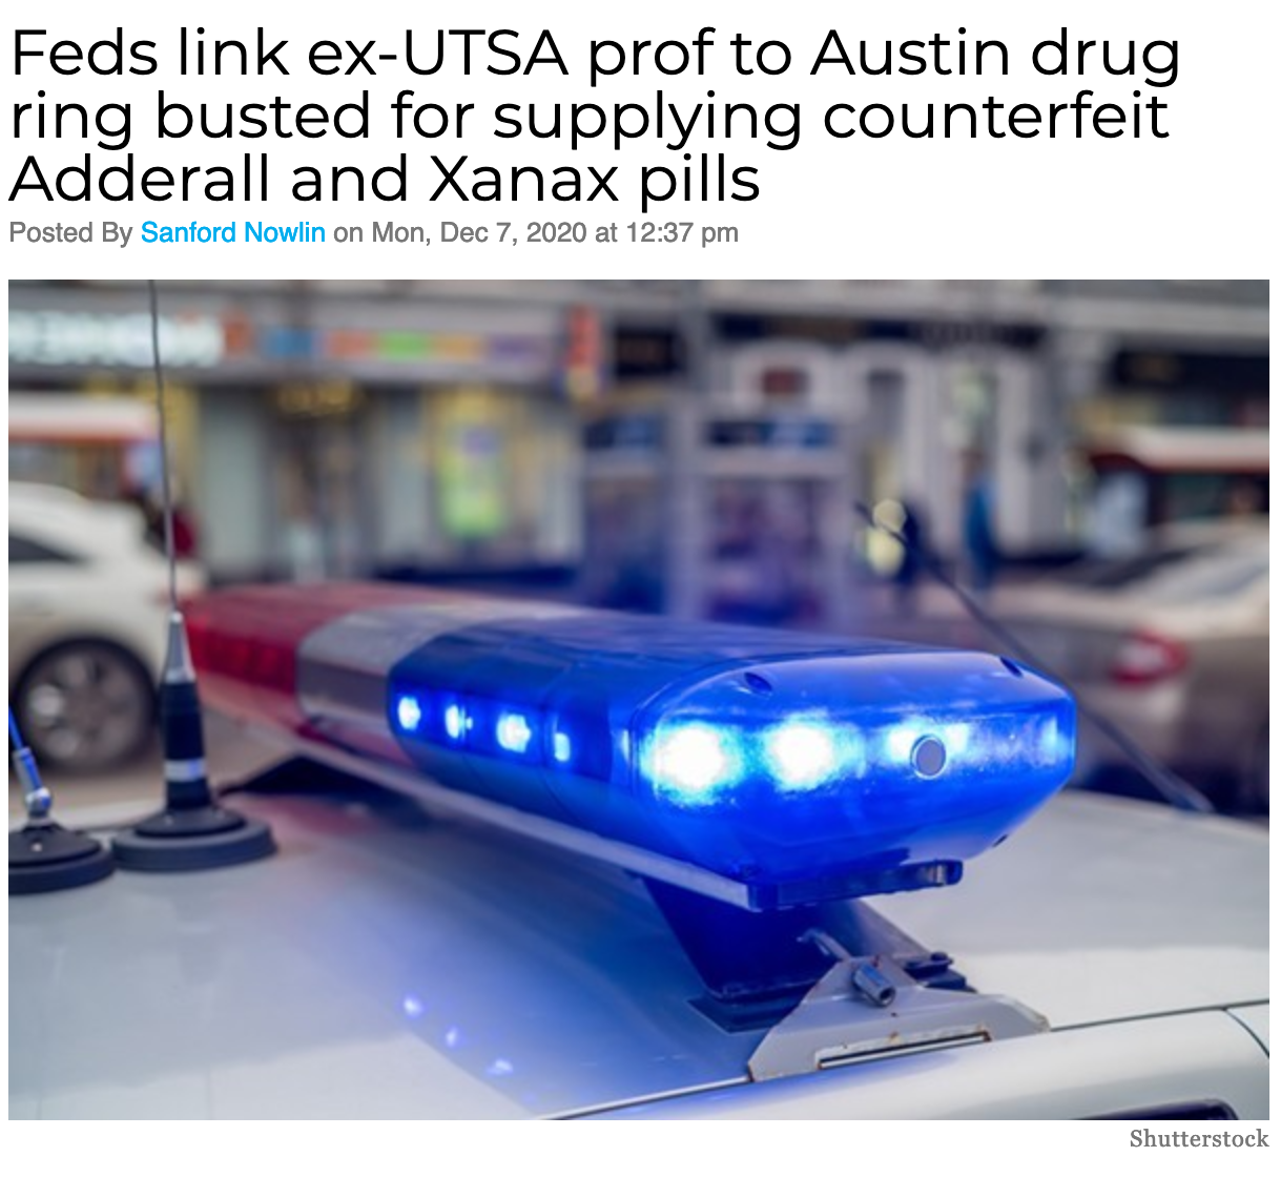 A former University of Texas at San Antonio instructor is accused of supplying drugs to an Austin-based drug ring that distributed counterfeit Adderall and Xanax. Read more here.